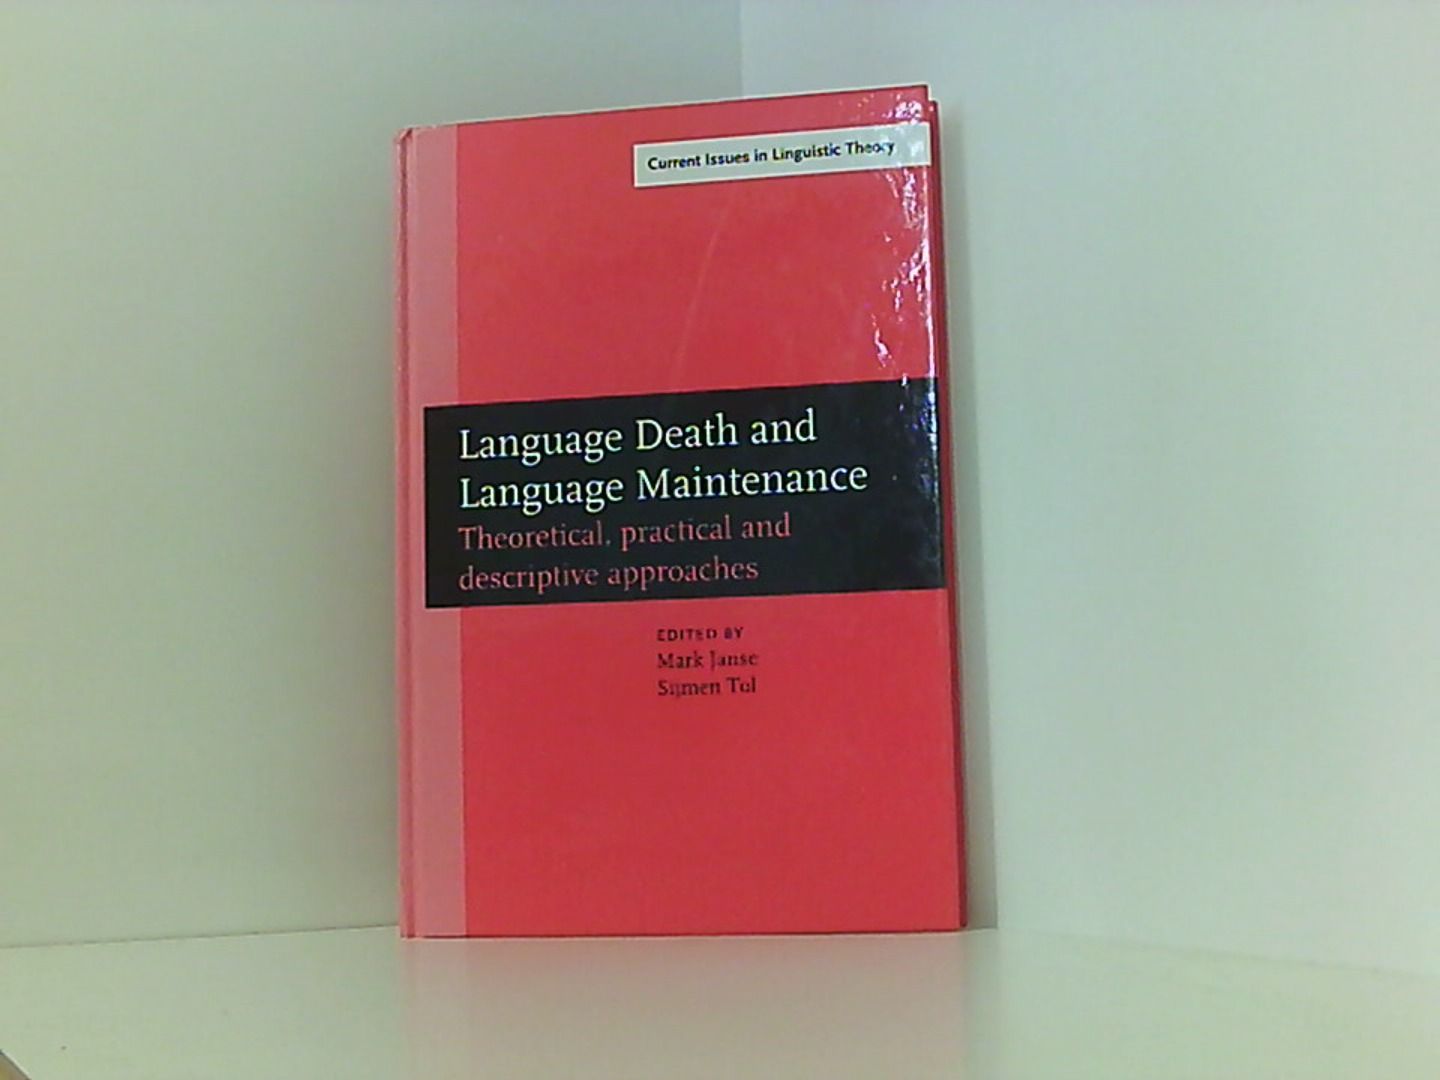 Language Death and Language Maintenance: Theoretical, Pratical...: Theoretical, practical and descriptive approaches (Current Issues in Linguistic Theory, Band 240) - Janse, Mark